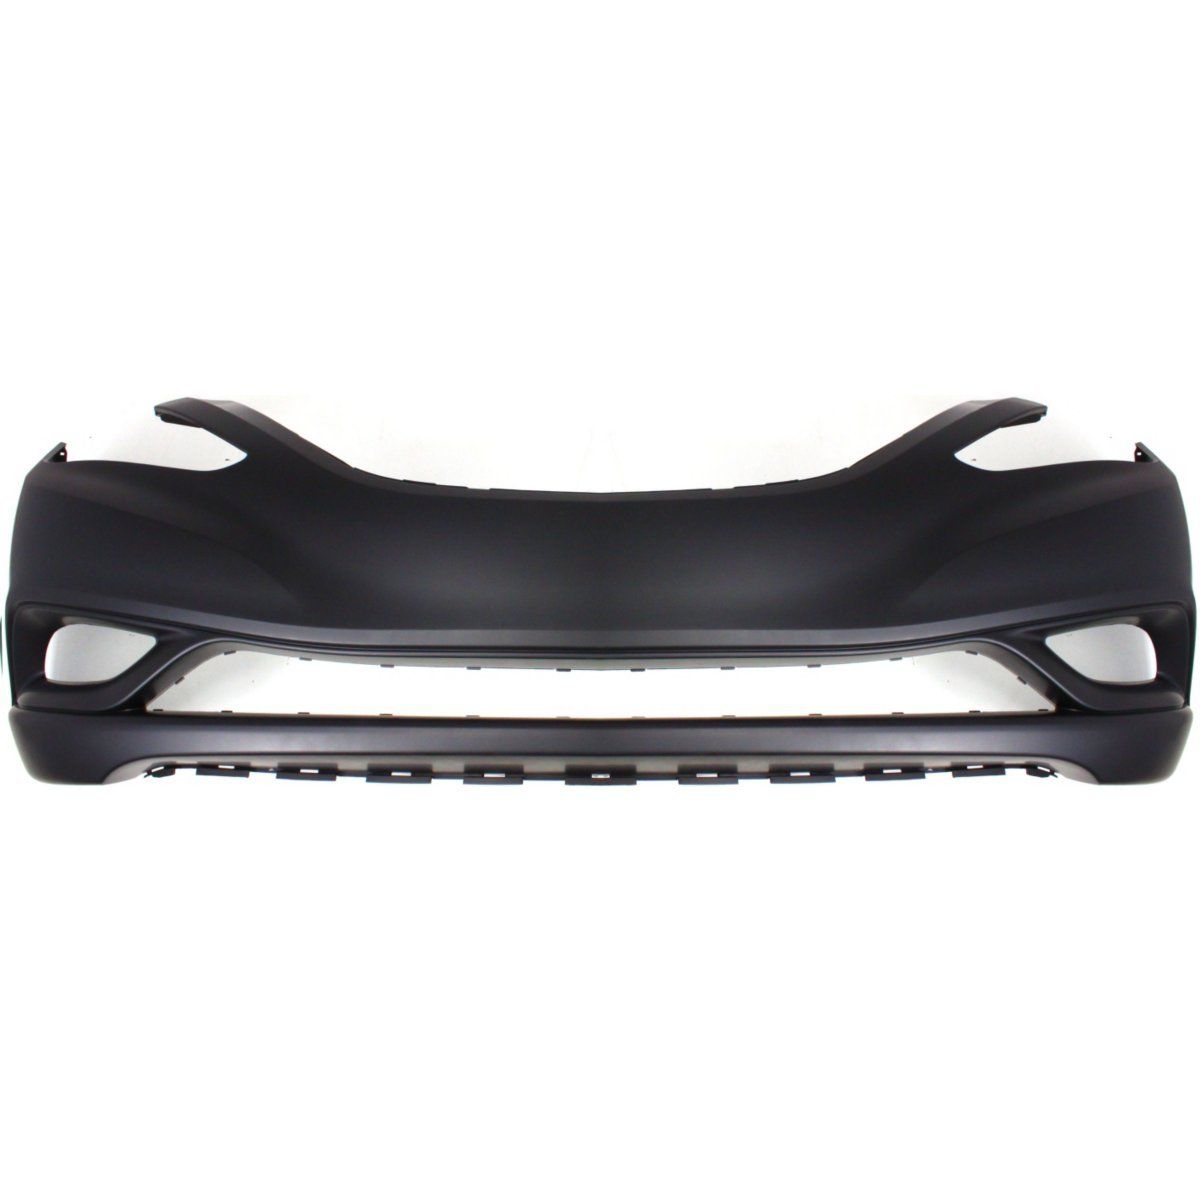 2011-2013 HYUNDAI SONATA Front Bumper Cover Painted to Match